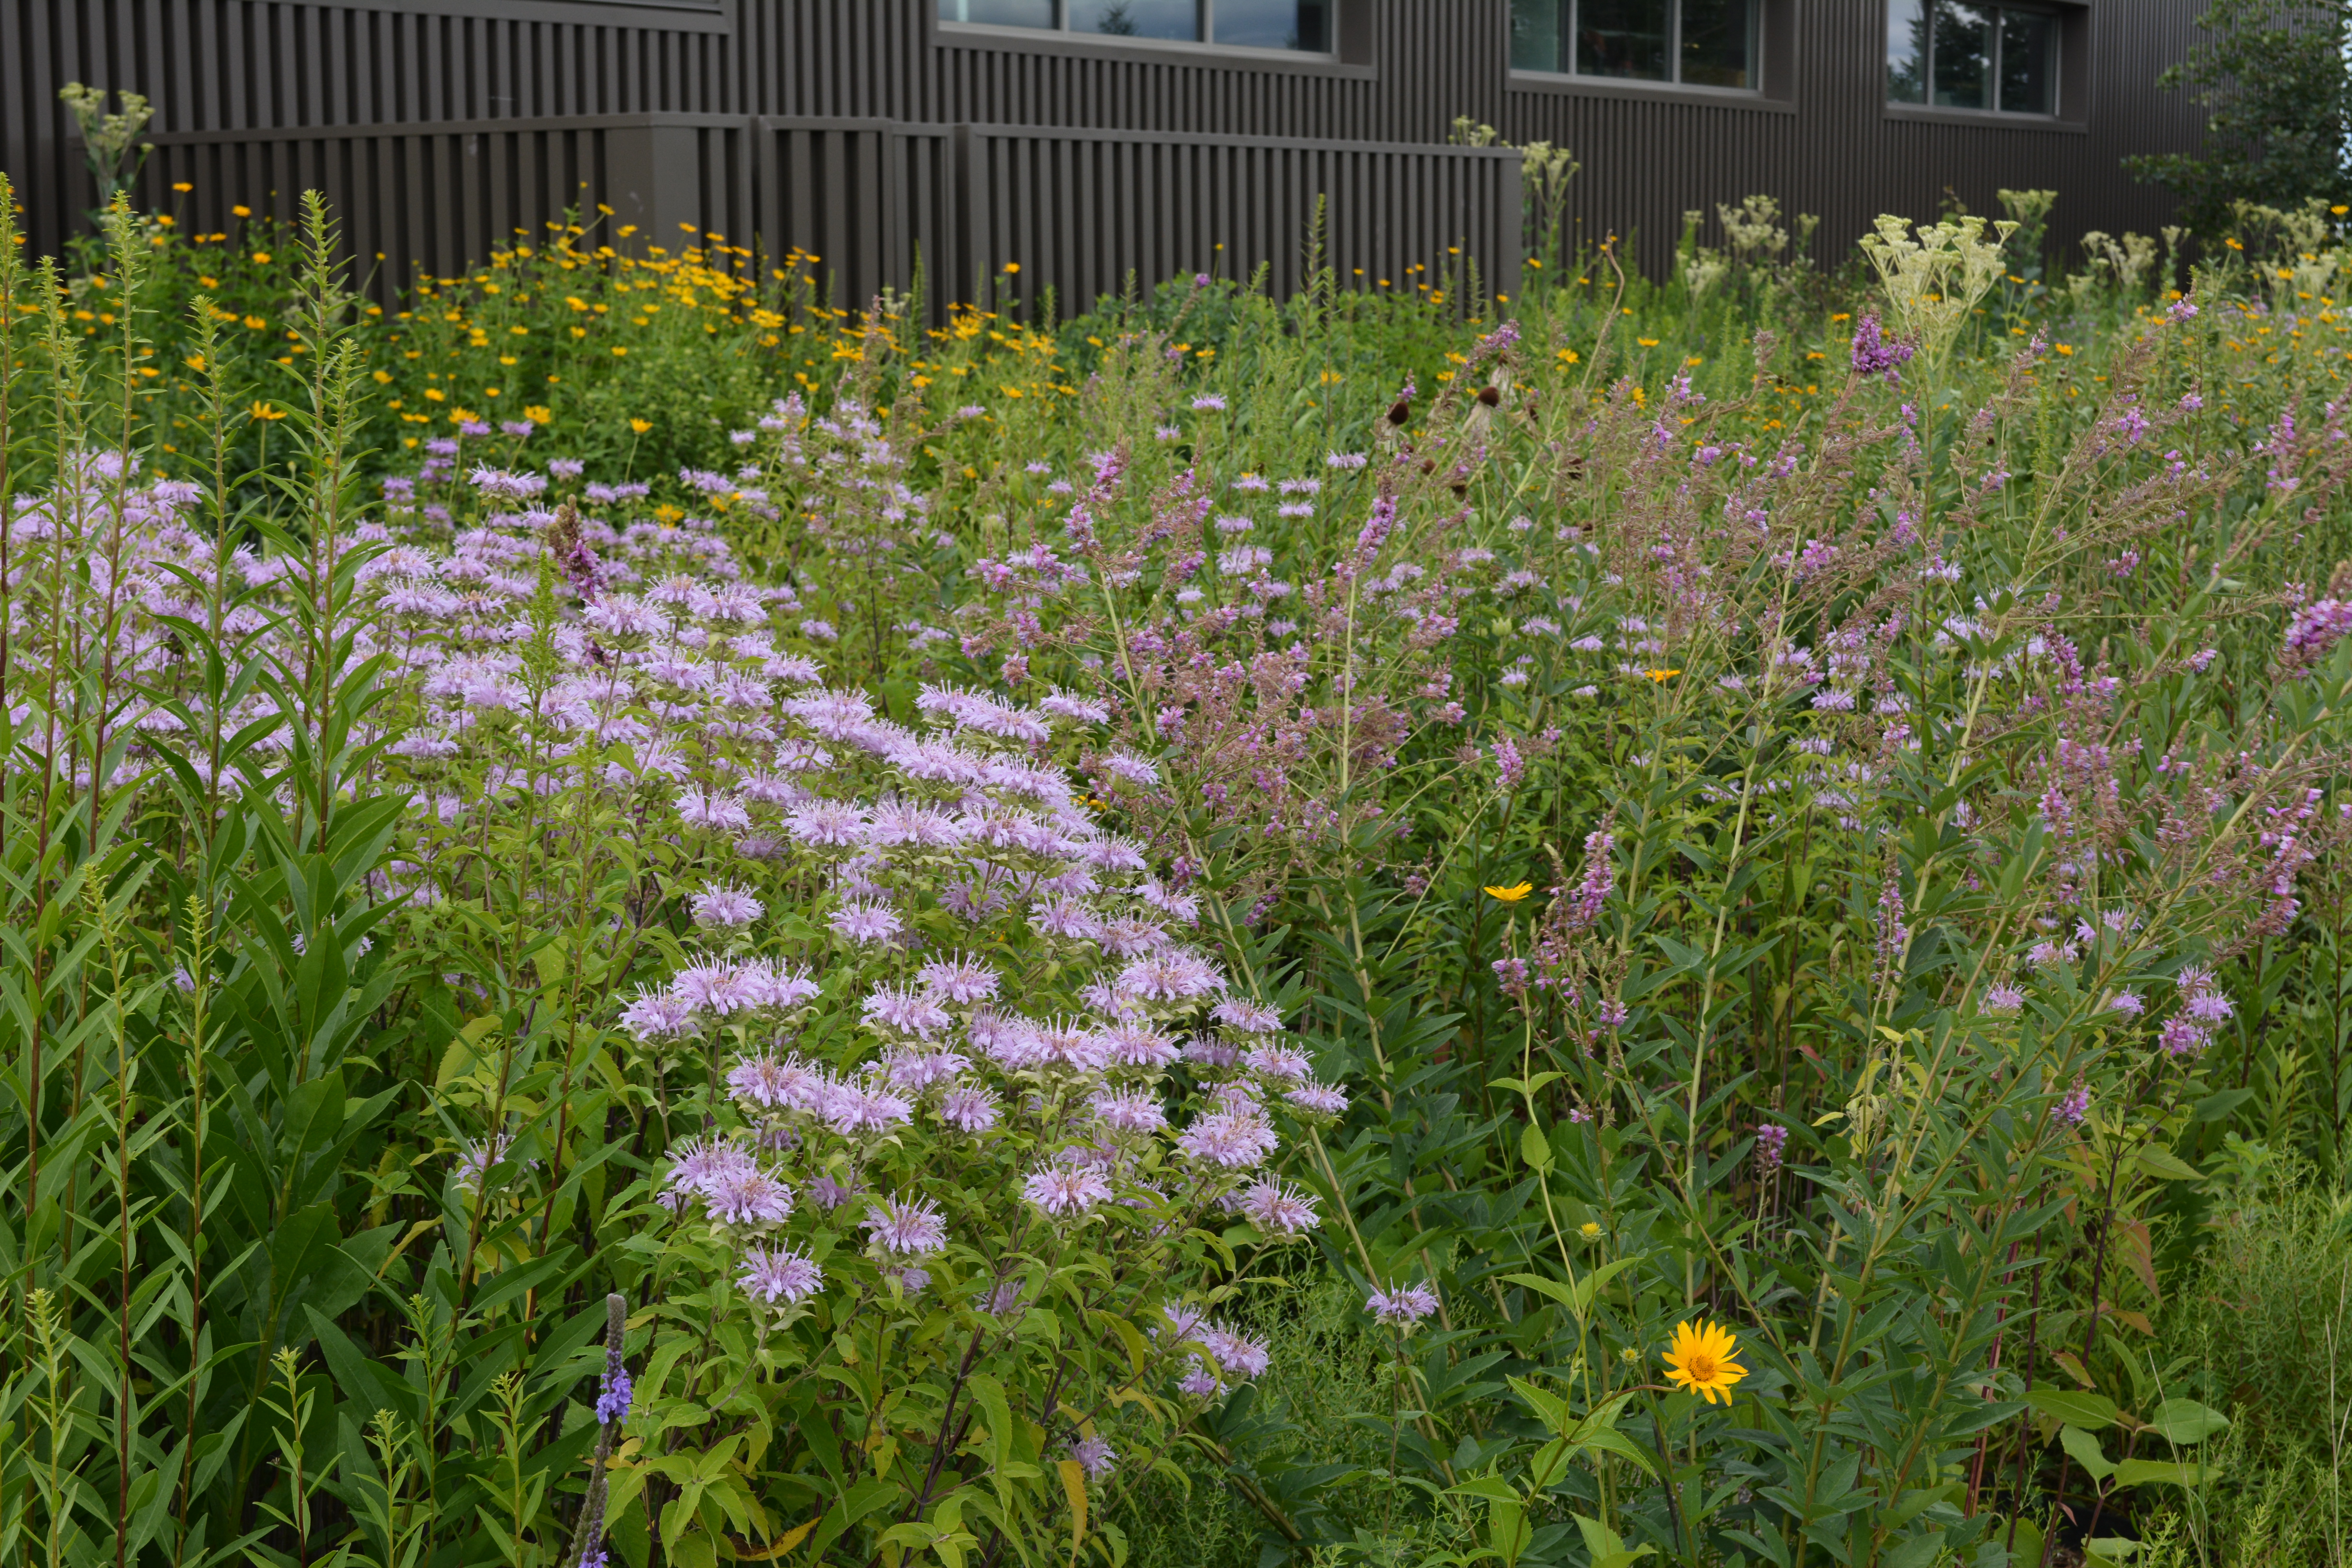 Pollinator garden of purple and yellow flowers in St. Paul